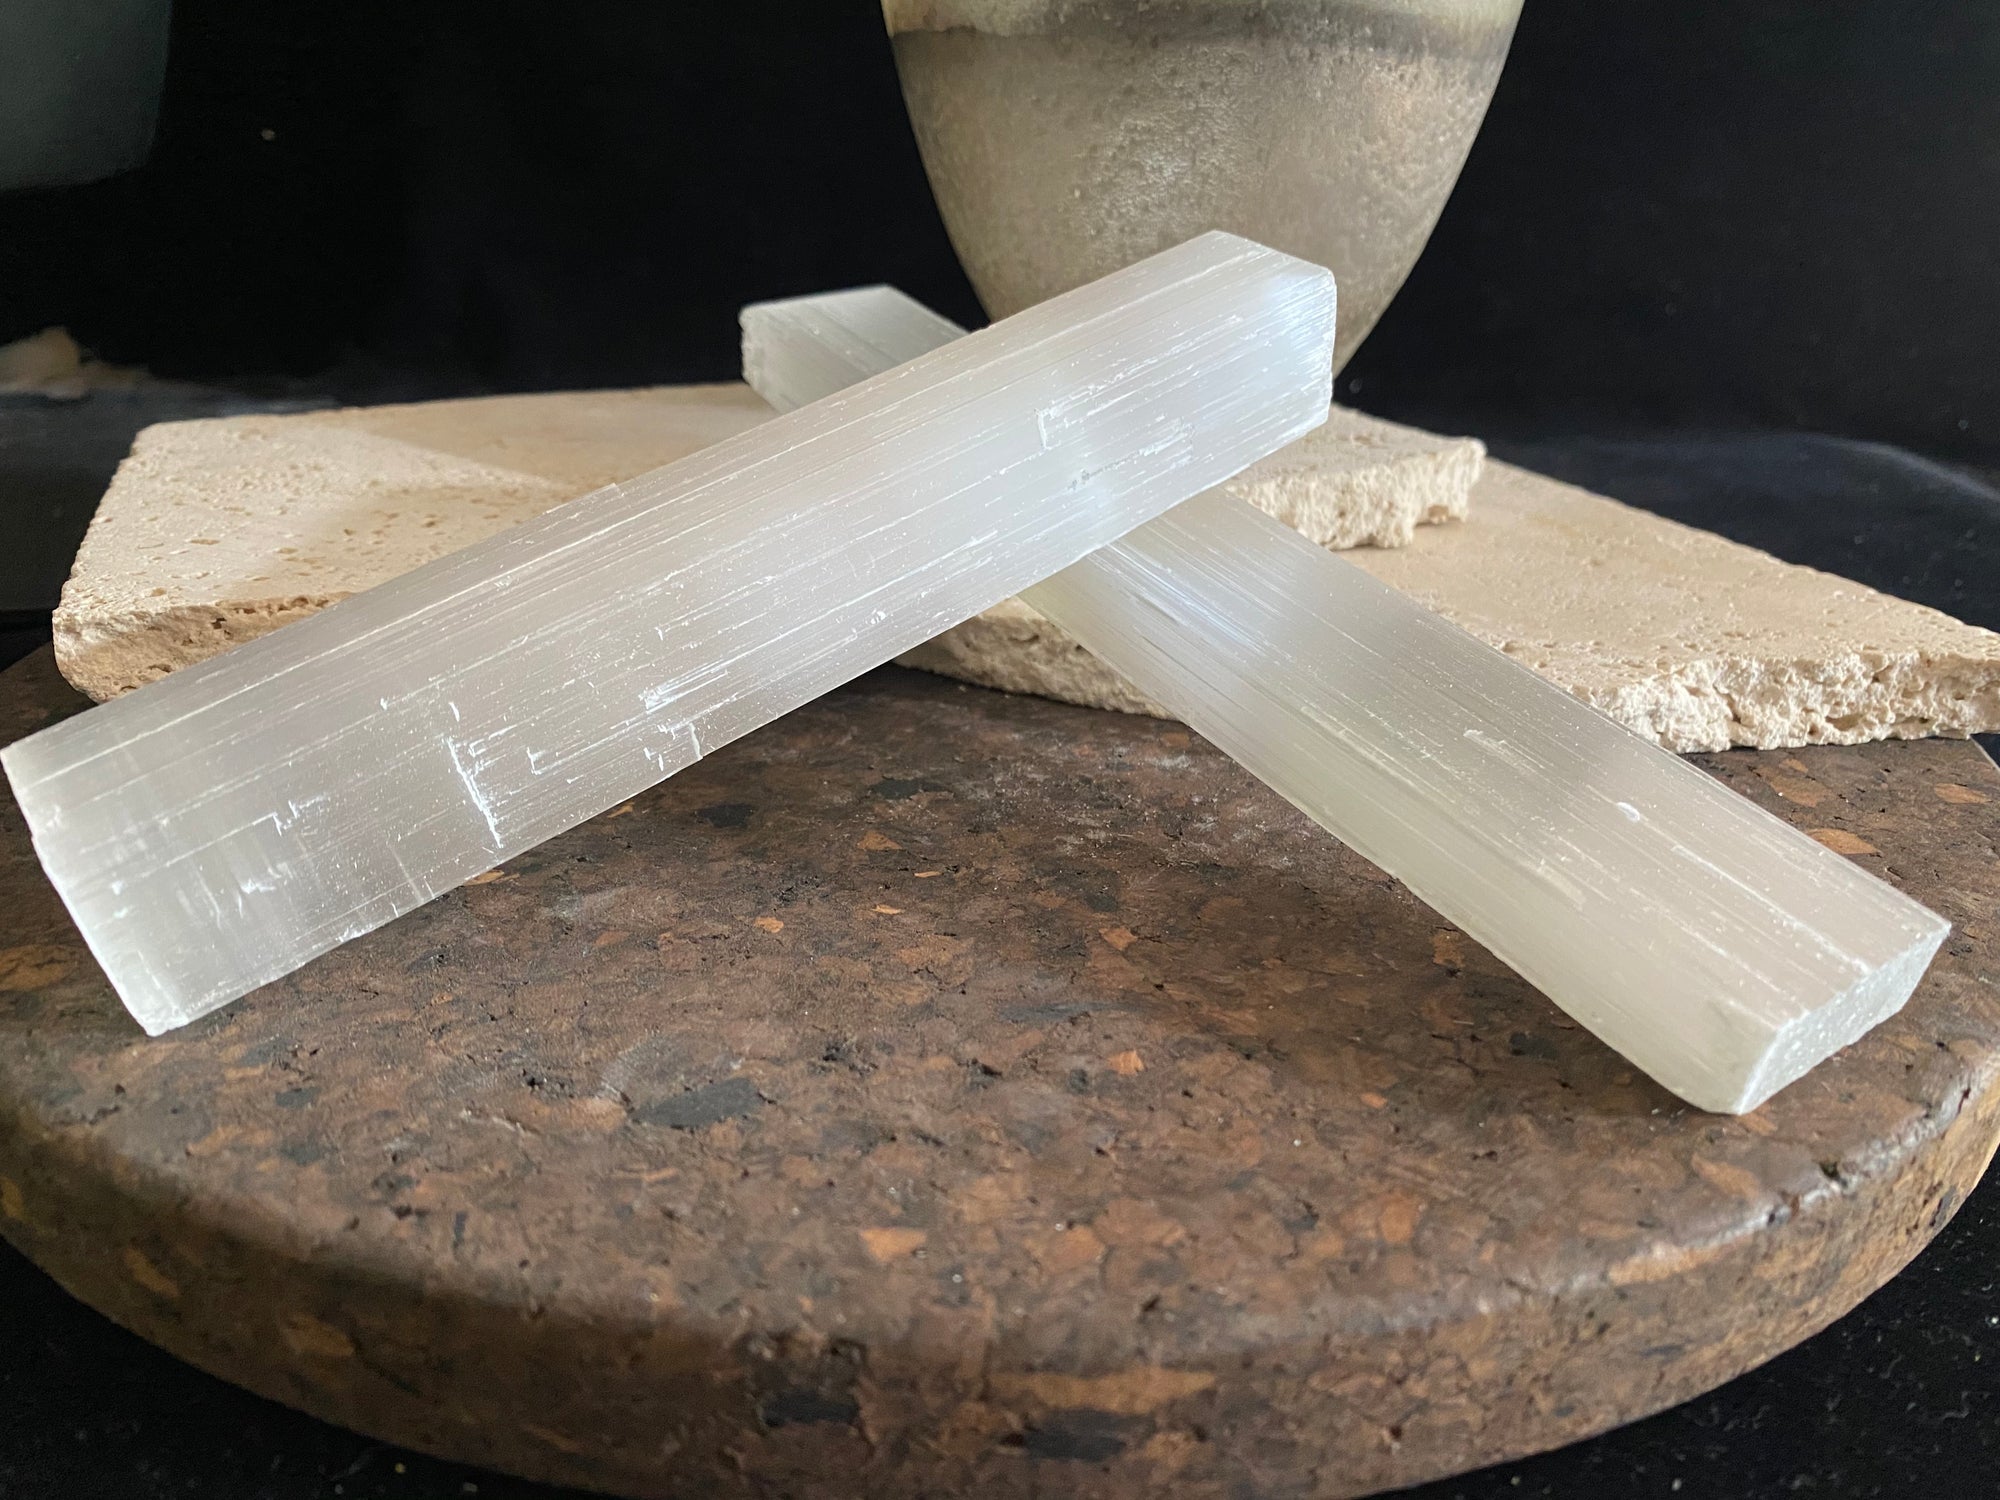 Selenite crystal wands or sticks. Use them as decoration, to add to a collection of crystals and gemstones, or as unique items of home decor.